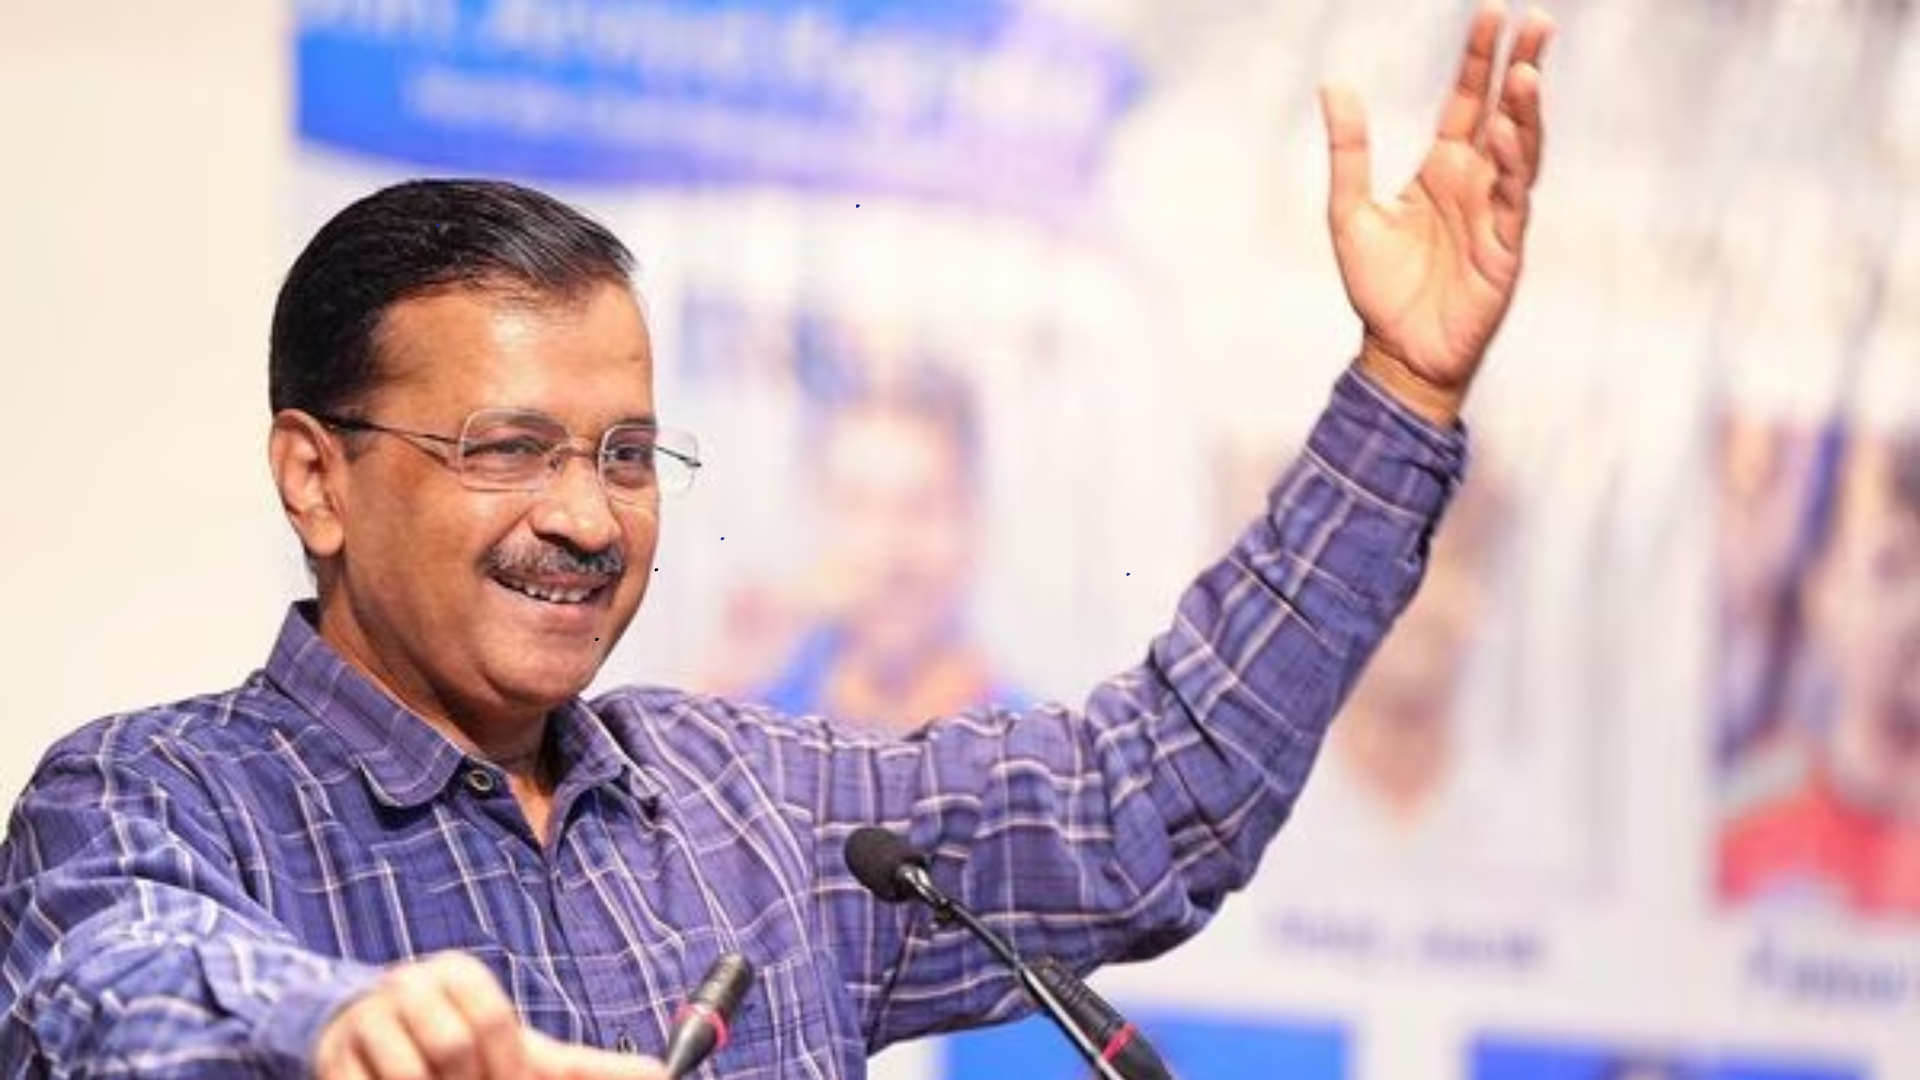 Excise Case: Delhi CM Kejriwal Appeals to Sessions Court Against Summons Issued Over ED Complaints